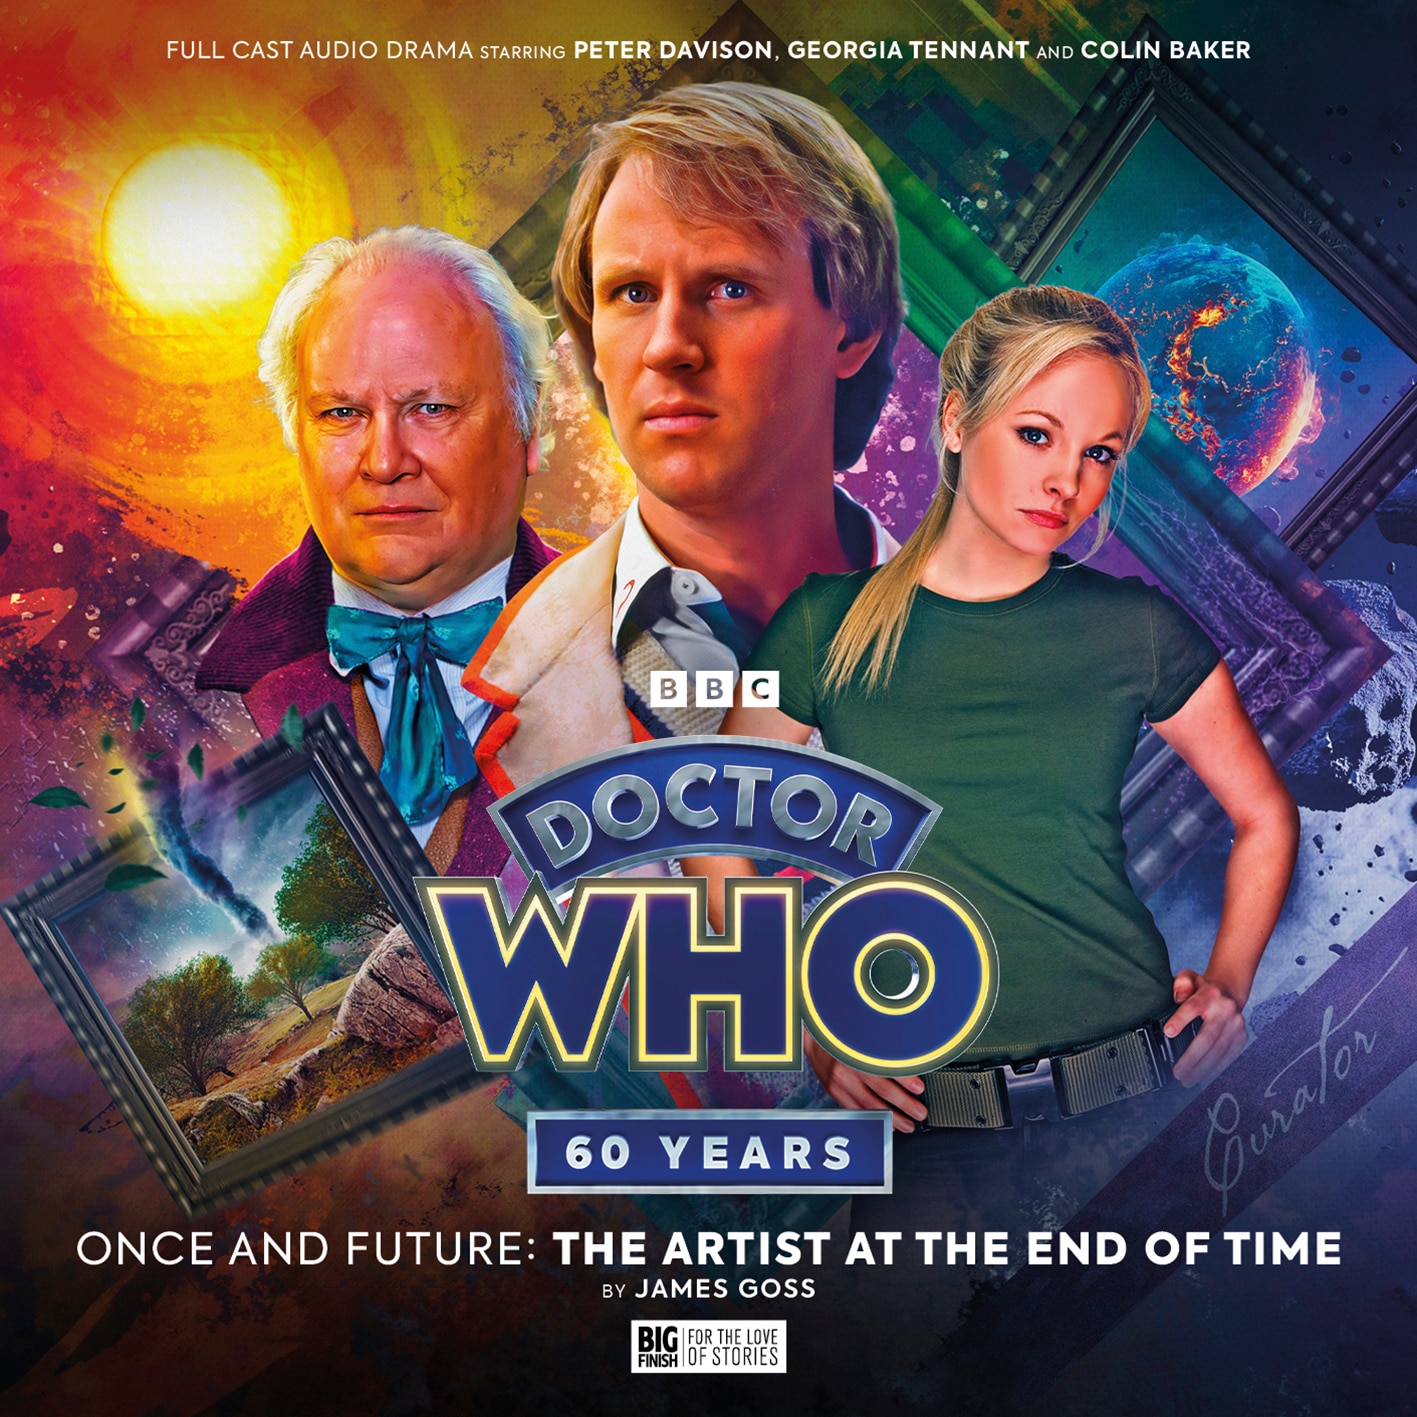 Doctor Who - Once and Future_ The Artist at the End of Time Standard Edition (Final)-86829ea6f2.jpg